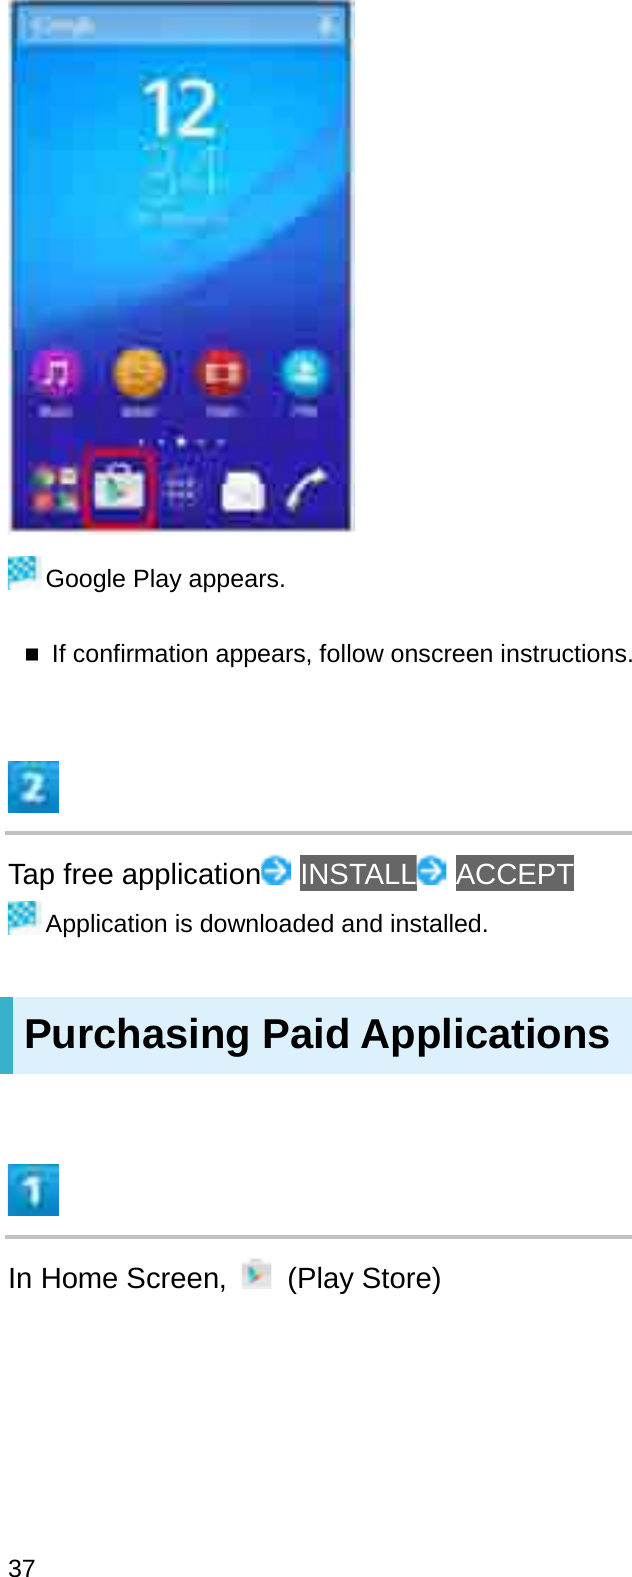 Google Play appears.If confirmation appears, follow onscreen instructions.Tap free application INSTALL ACCEPTApplication is downloaded and installed.Purchasing Paid ApplicationsIn Home Screen,  (Play Store)37